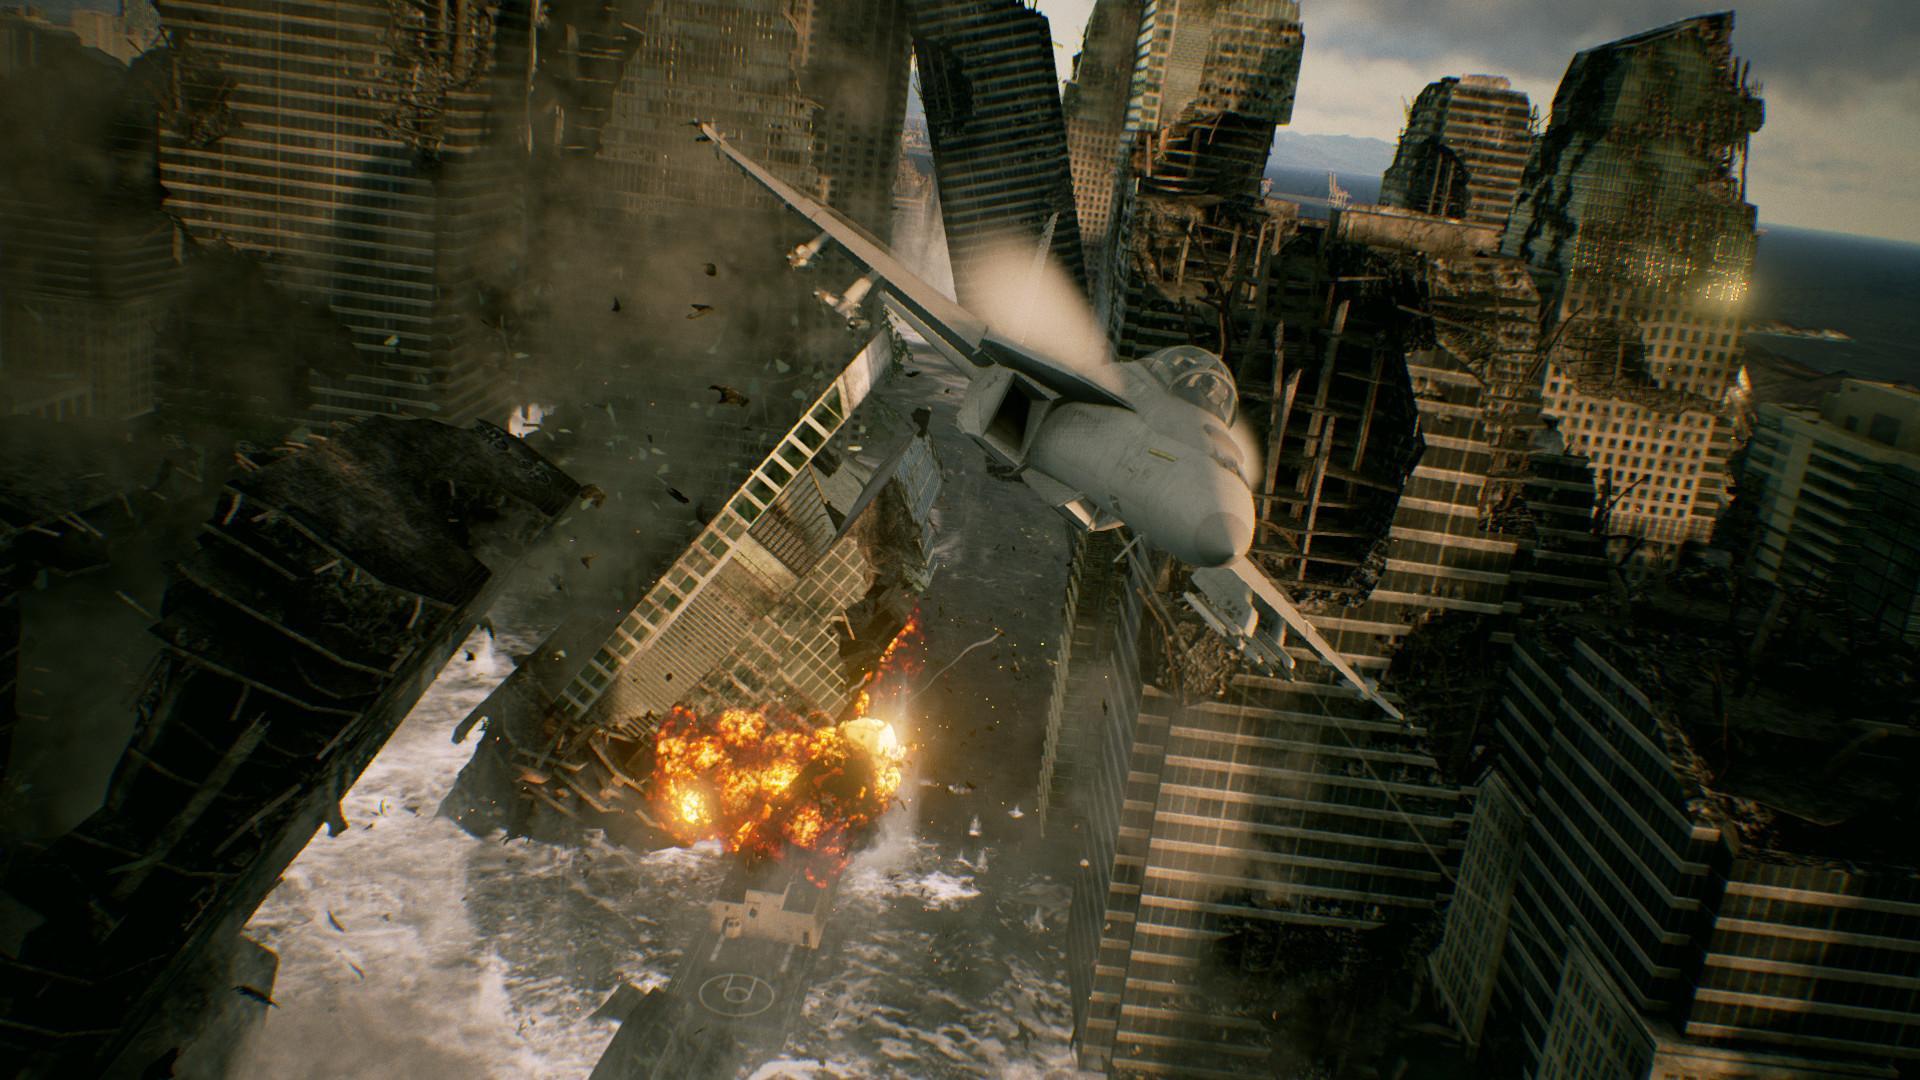 Screenshot №5 from game ACE COMBAT™ 7: SKIES UNKNOWN